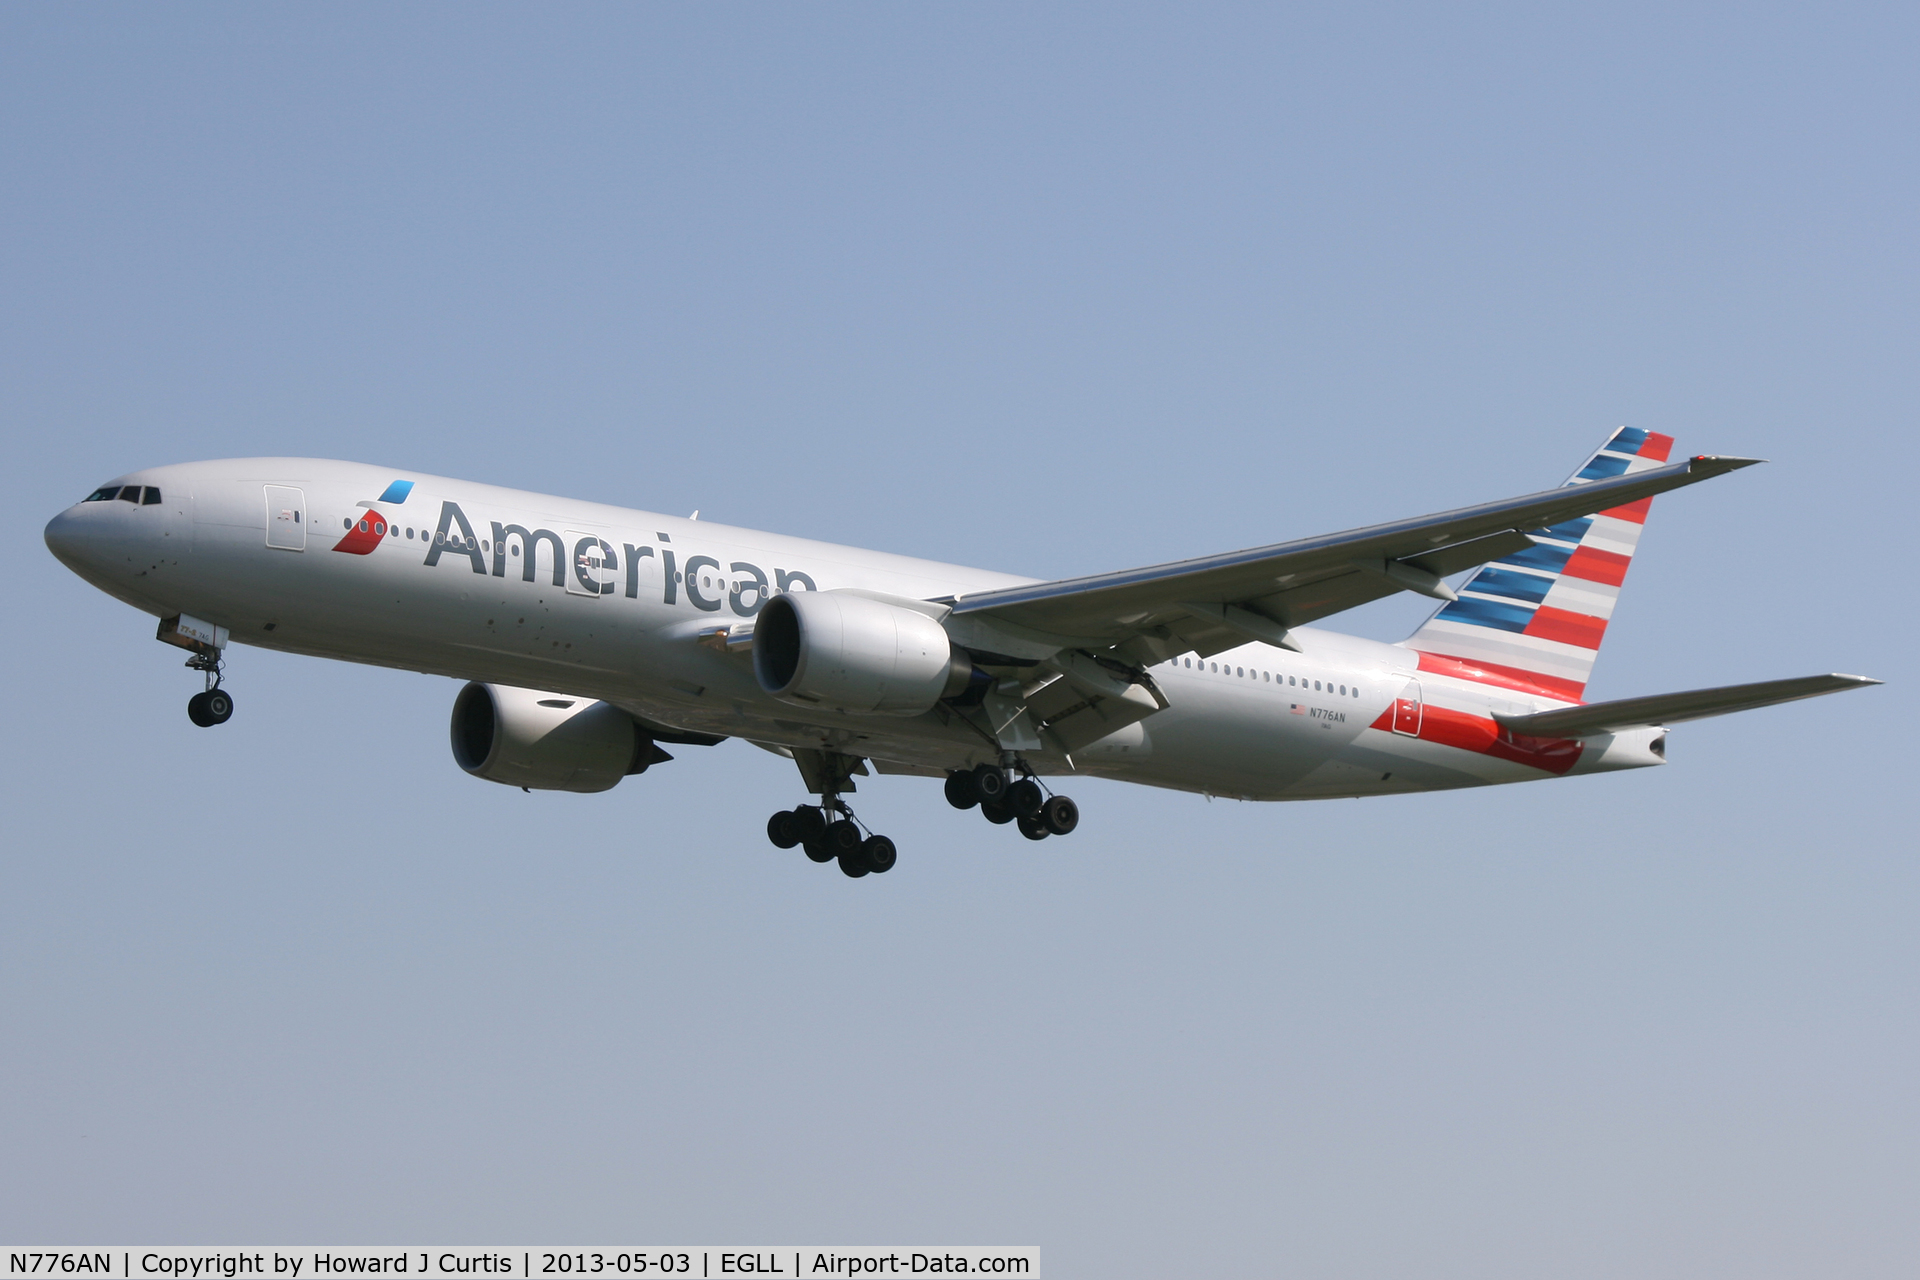 N776AN, 1999 Boeing 777-223 C/N 29582, American Airlines, on approach to runway 27L. Now painted in new colours.